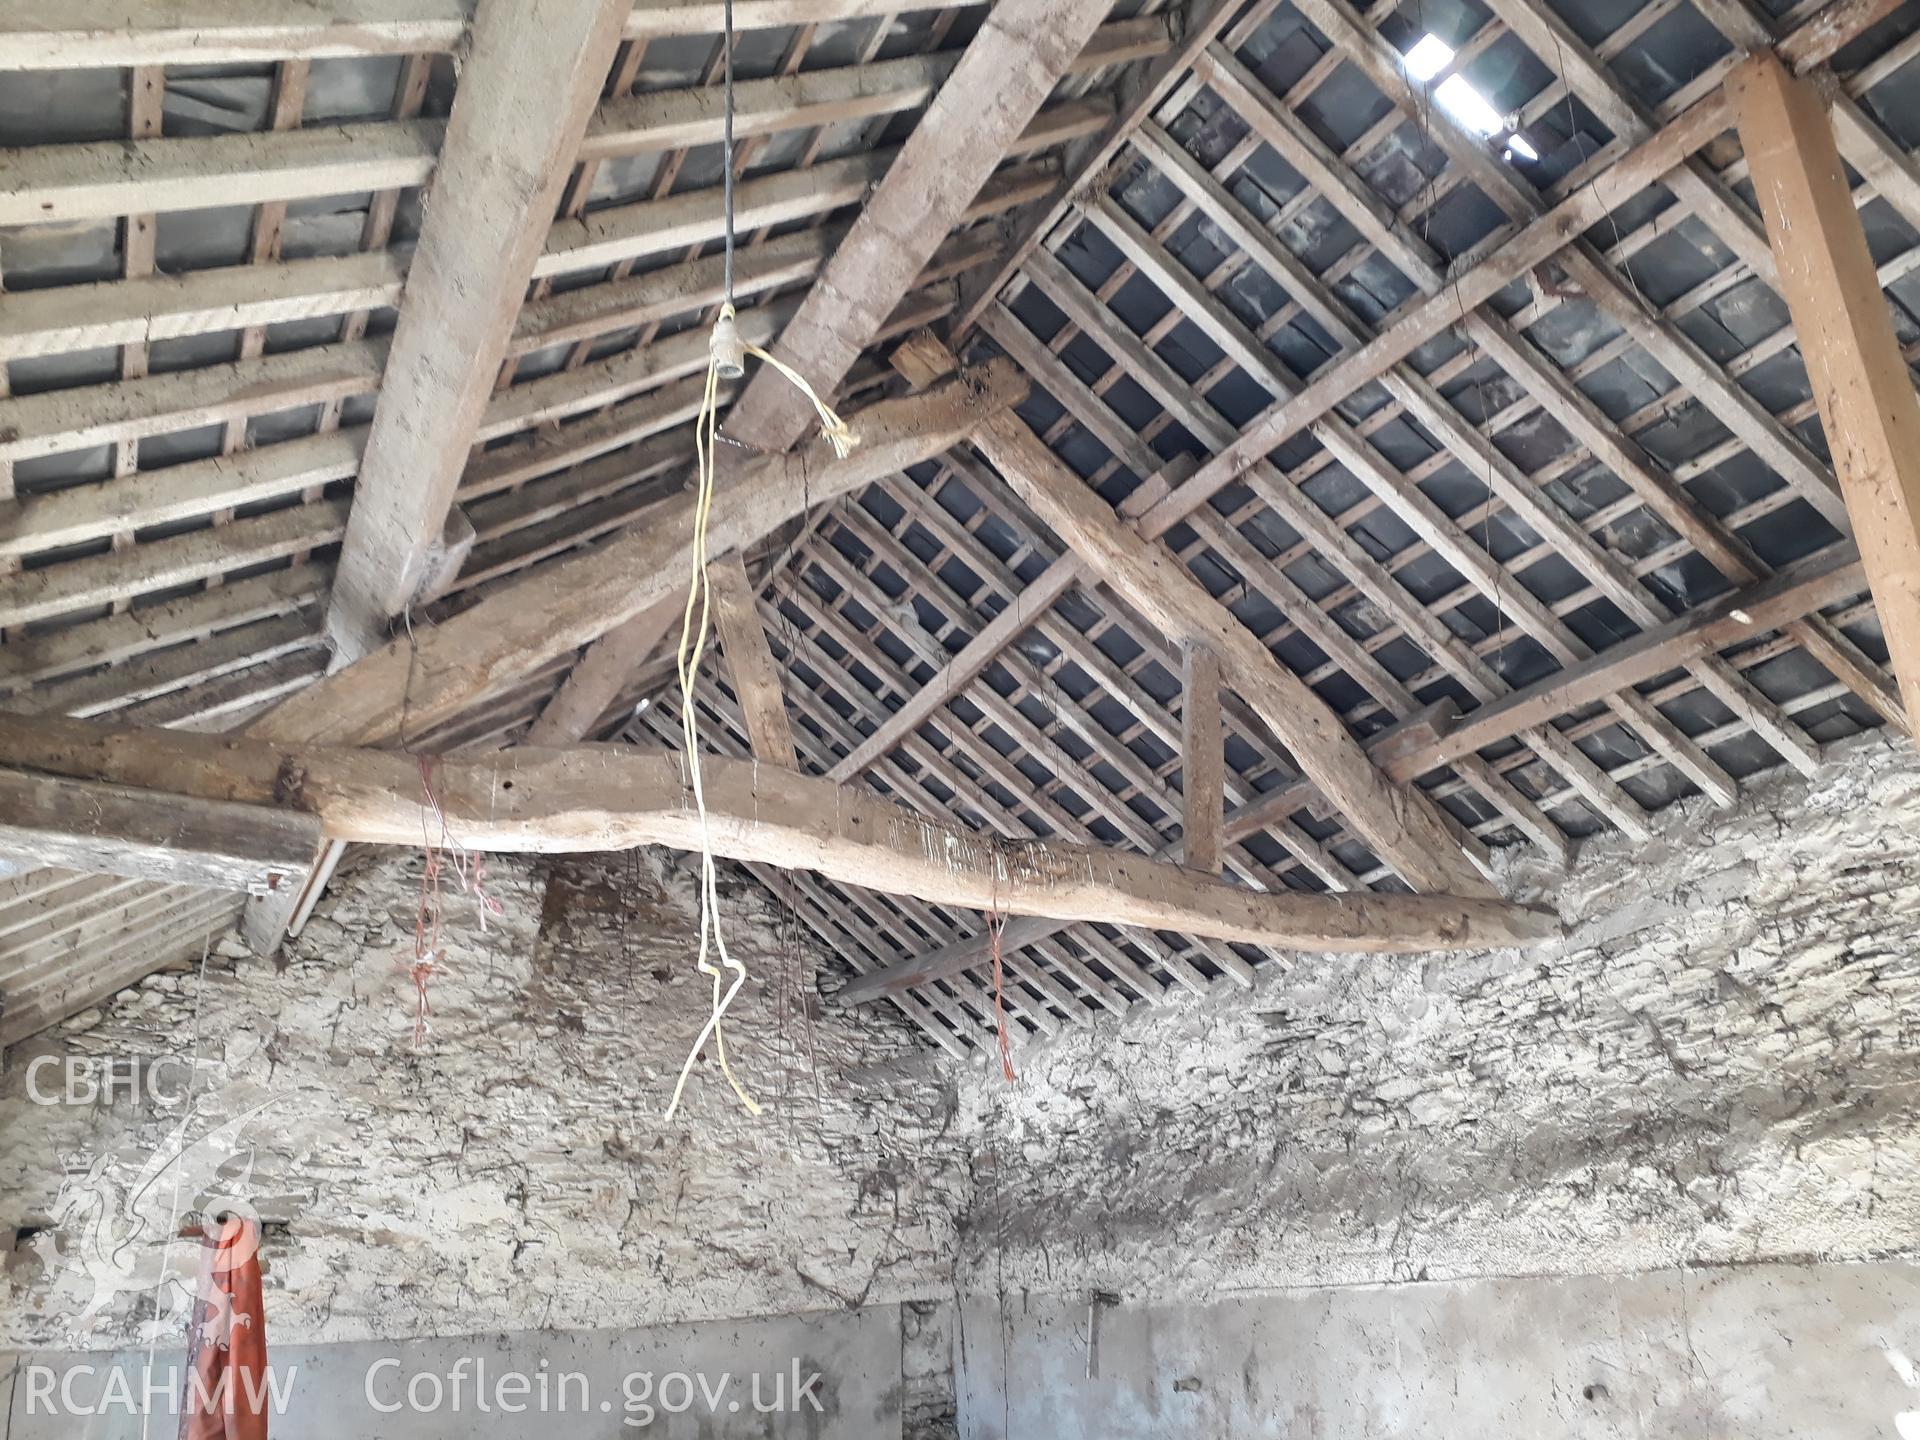 Barn interior view south-west. Photographed as part of archaeological building recording conducted at Bryn Ysguboriau, Llanelidan, Denbighshire, carried out by Archaeology Wales, 2018. Project no. P2587.